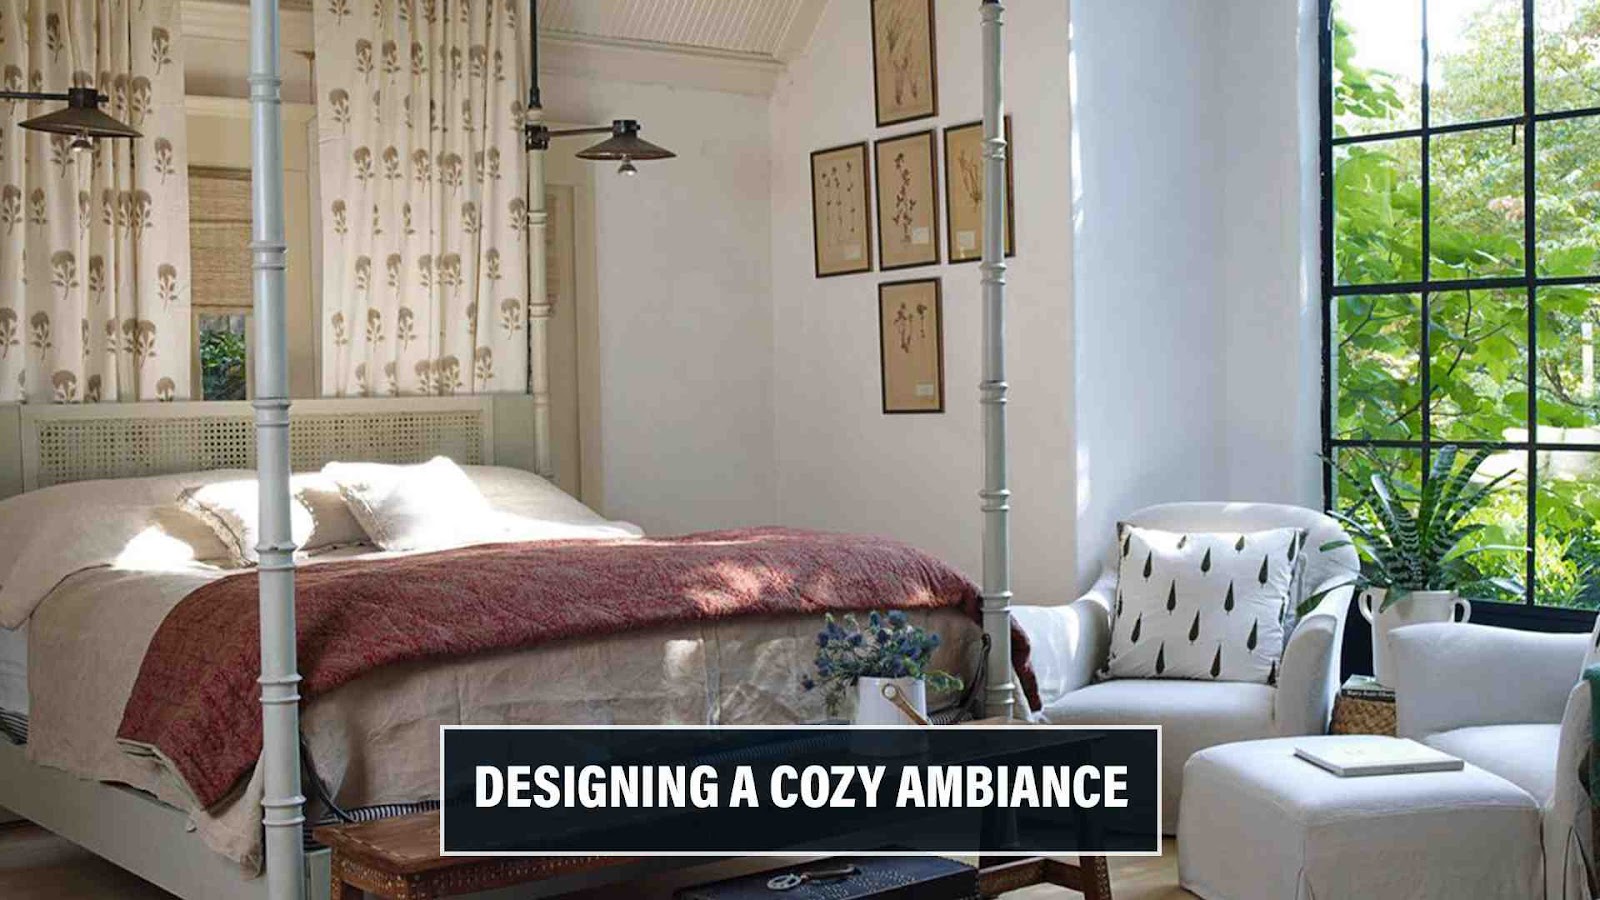 Designing a Cozy Ambiance